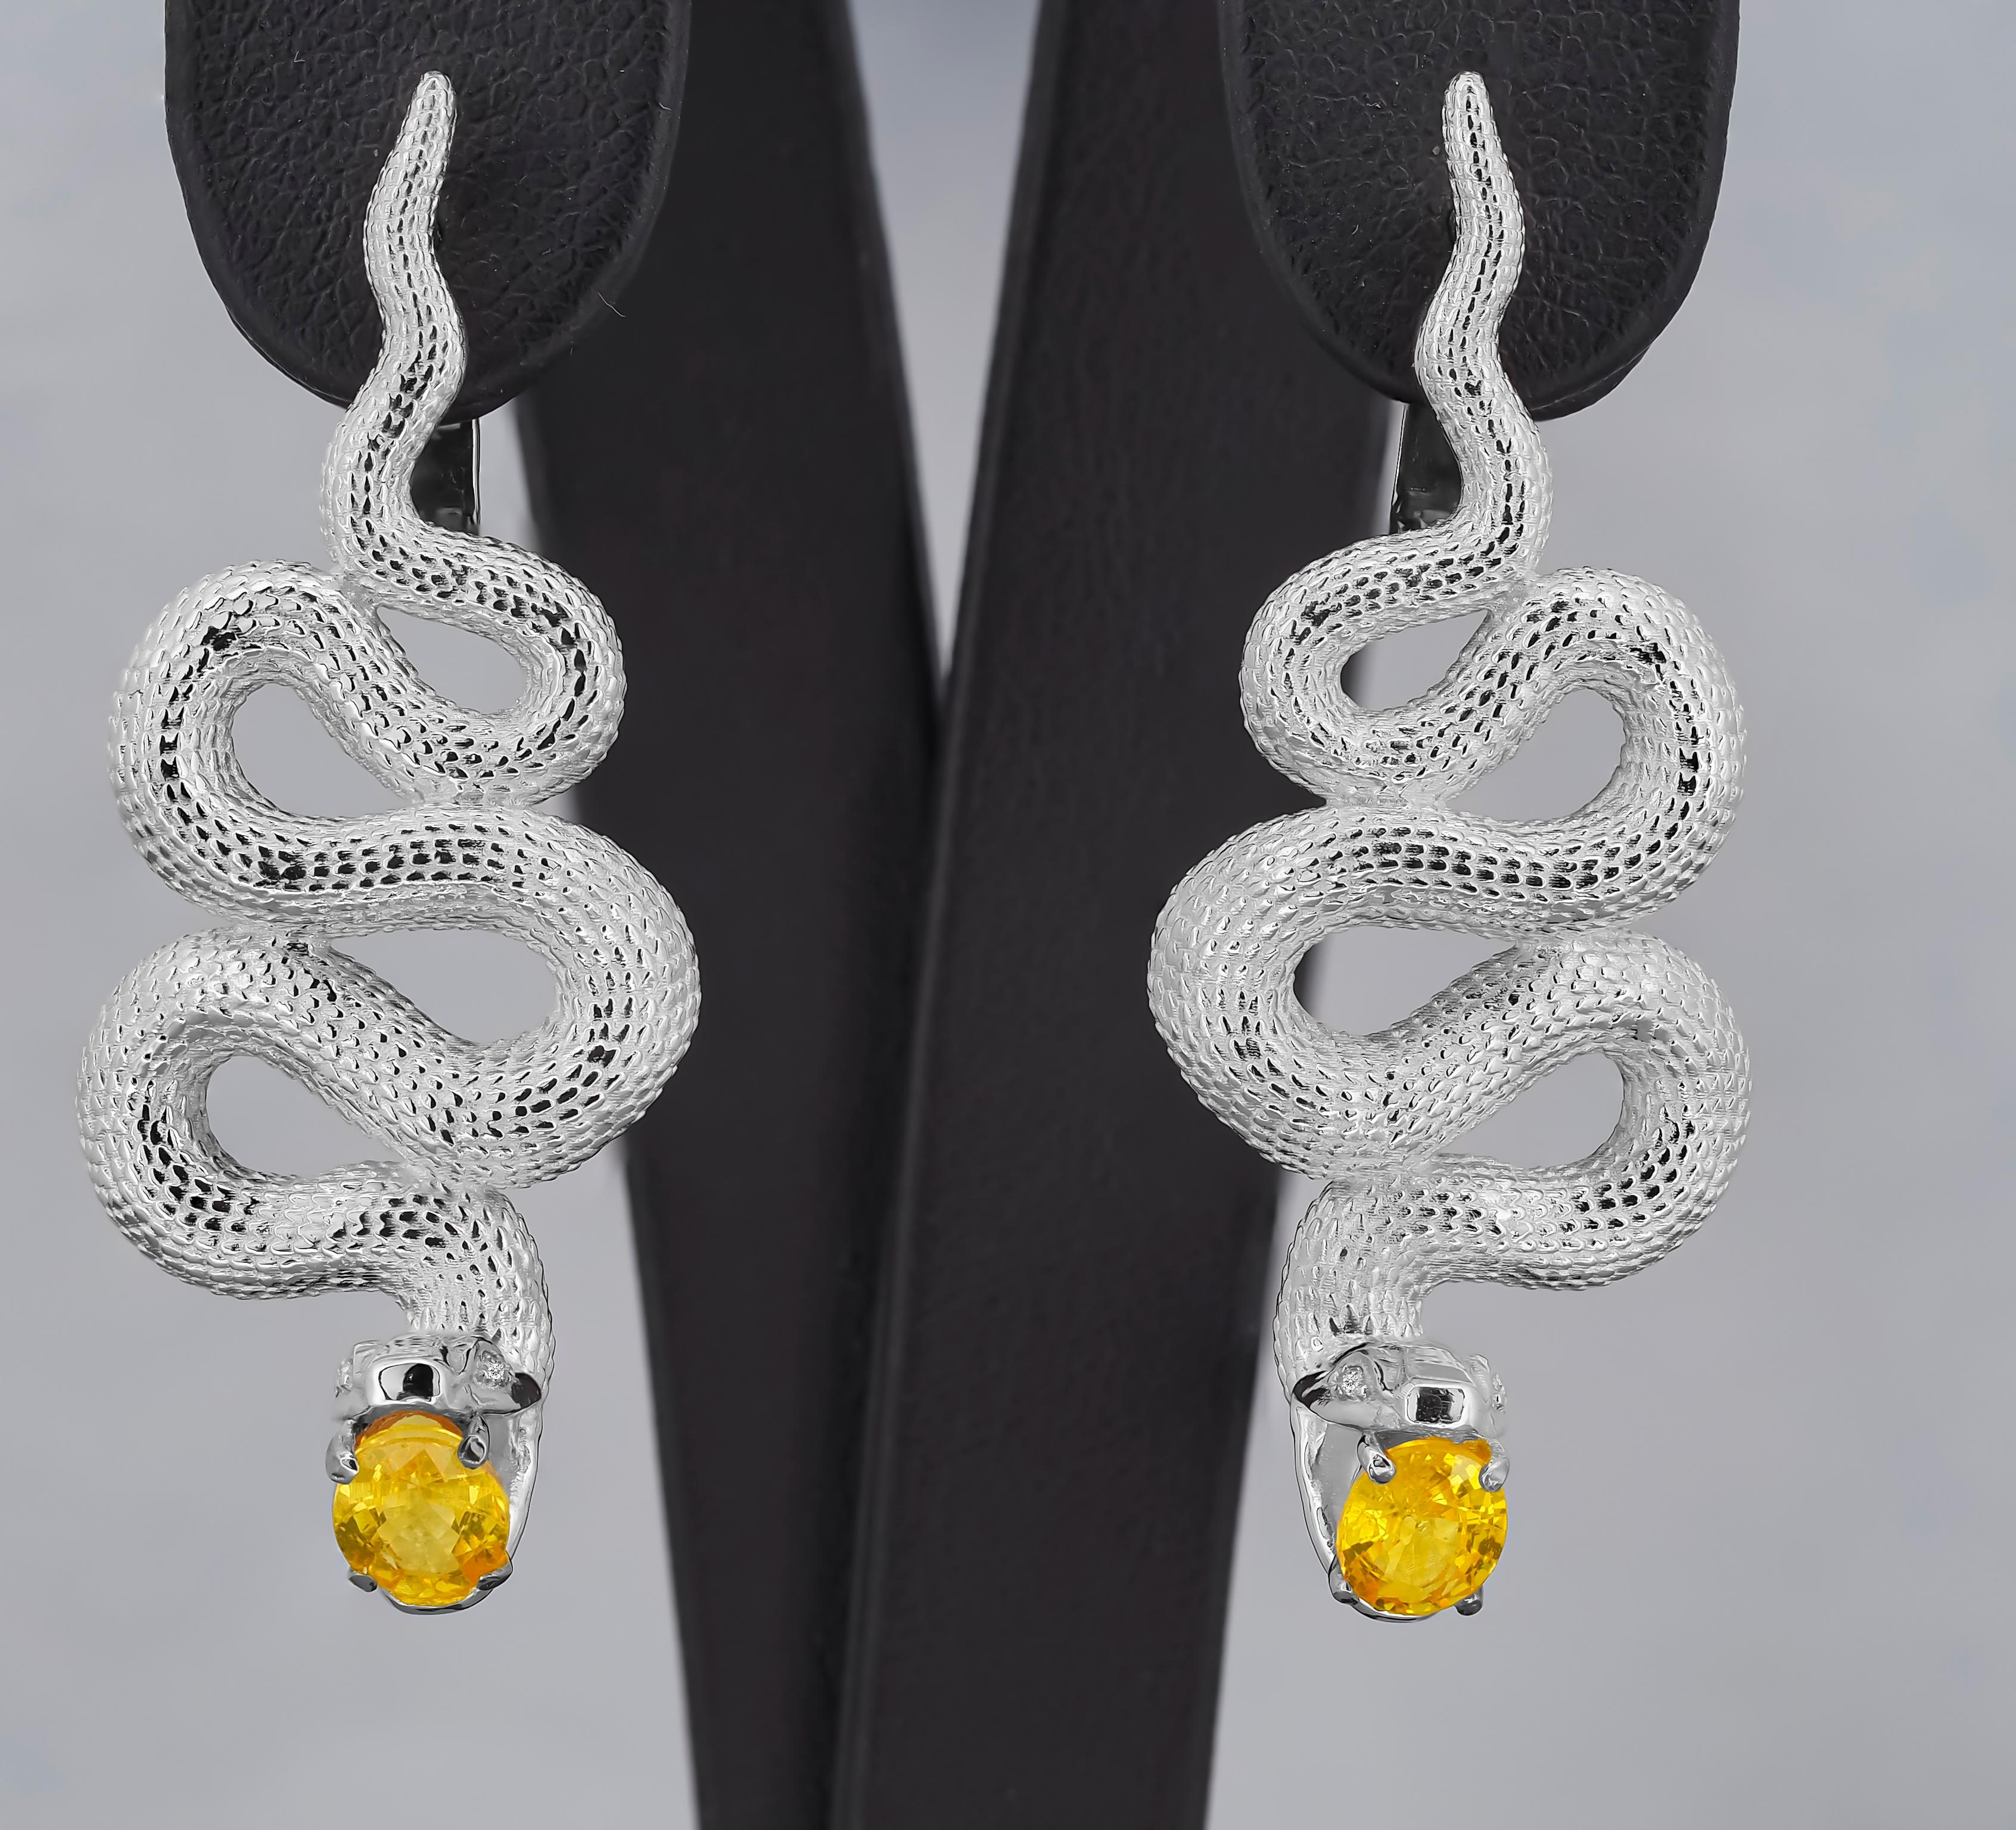 Massive Snake earrings with sapphires in opened mouth and diamonds in eyes.

Genuine sapphire earrings. Snake earrings. 
Metal: sterling silver
Earrings Total weight: 13.3 g.

Size 42.9x17.5 mm

Central stones: Natural Sapphires - 2 pieces
Cut: